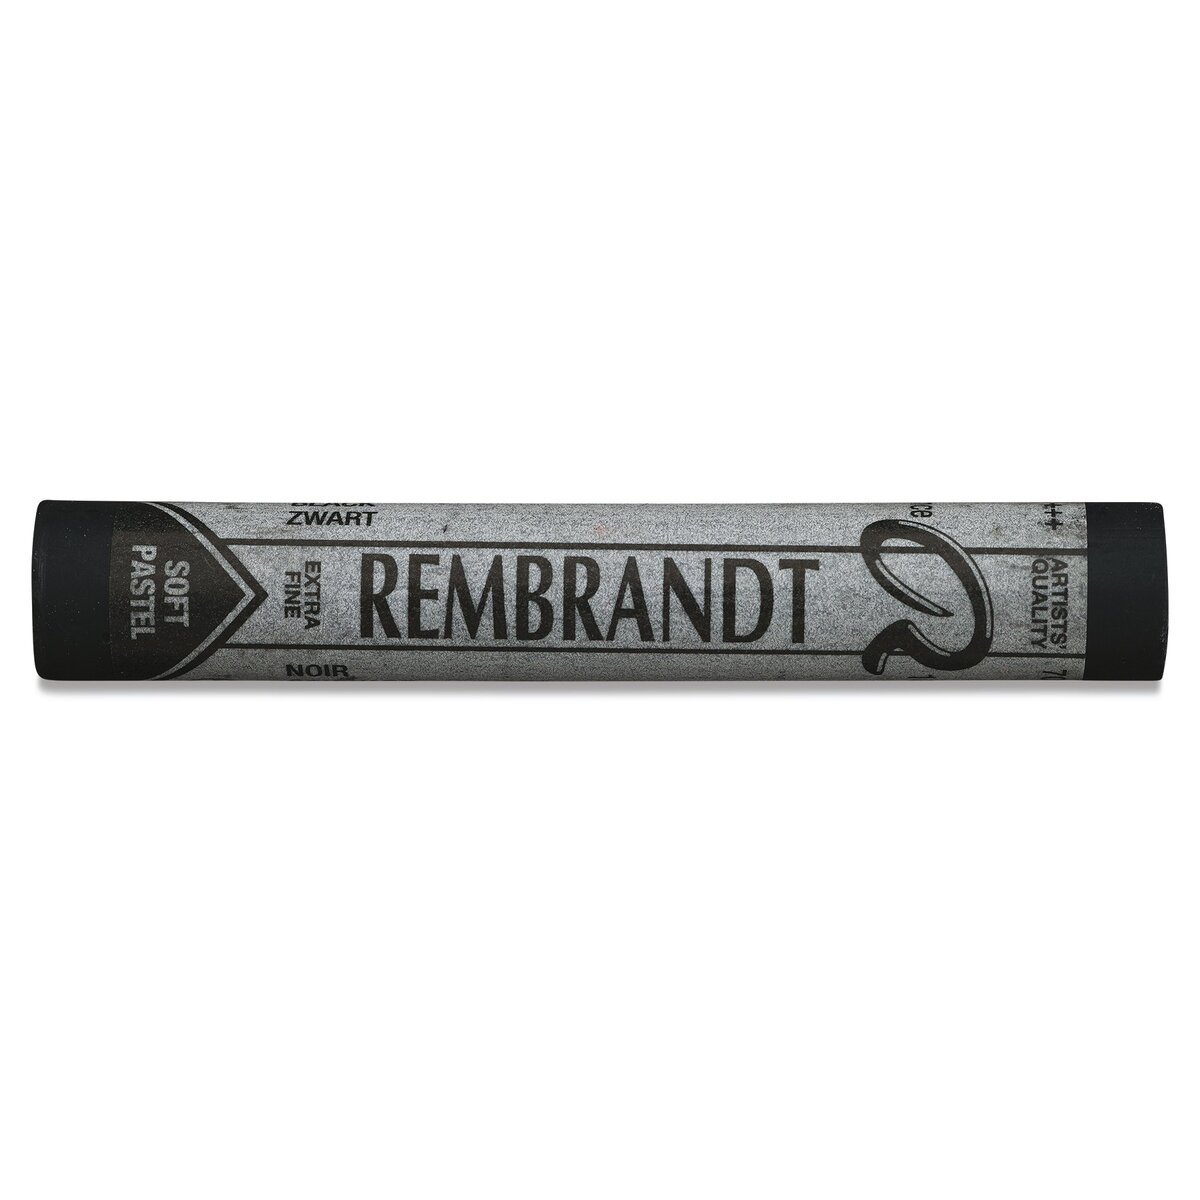 Rembrandt Soft Pastel Set - Luxe Set of 45, Assorted Colors, 15 Full Sticks  and 30 Half Sticks